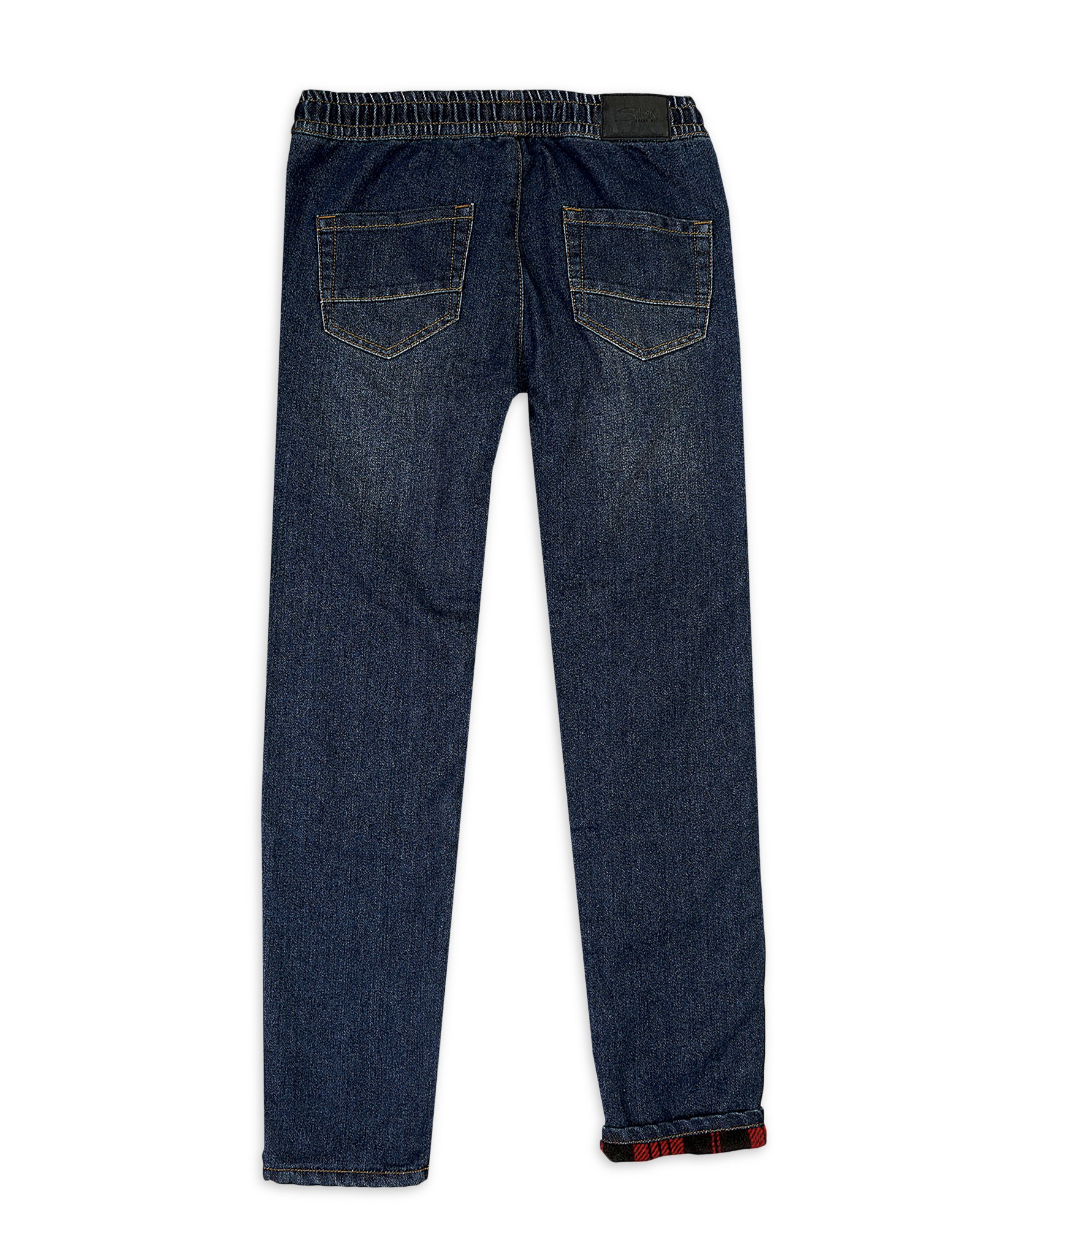 Silver Jeans Co. - Boys Nathan Flannel Lined Skinny Fit Denim Jeans (Sizes 4-16)